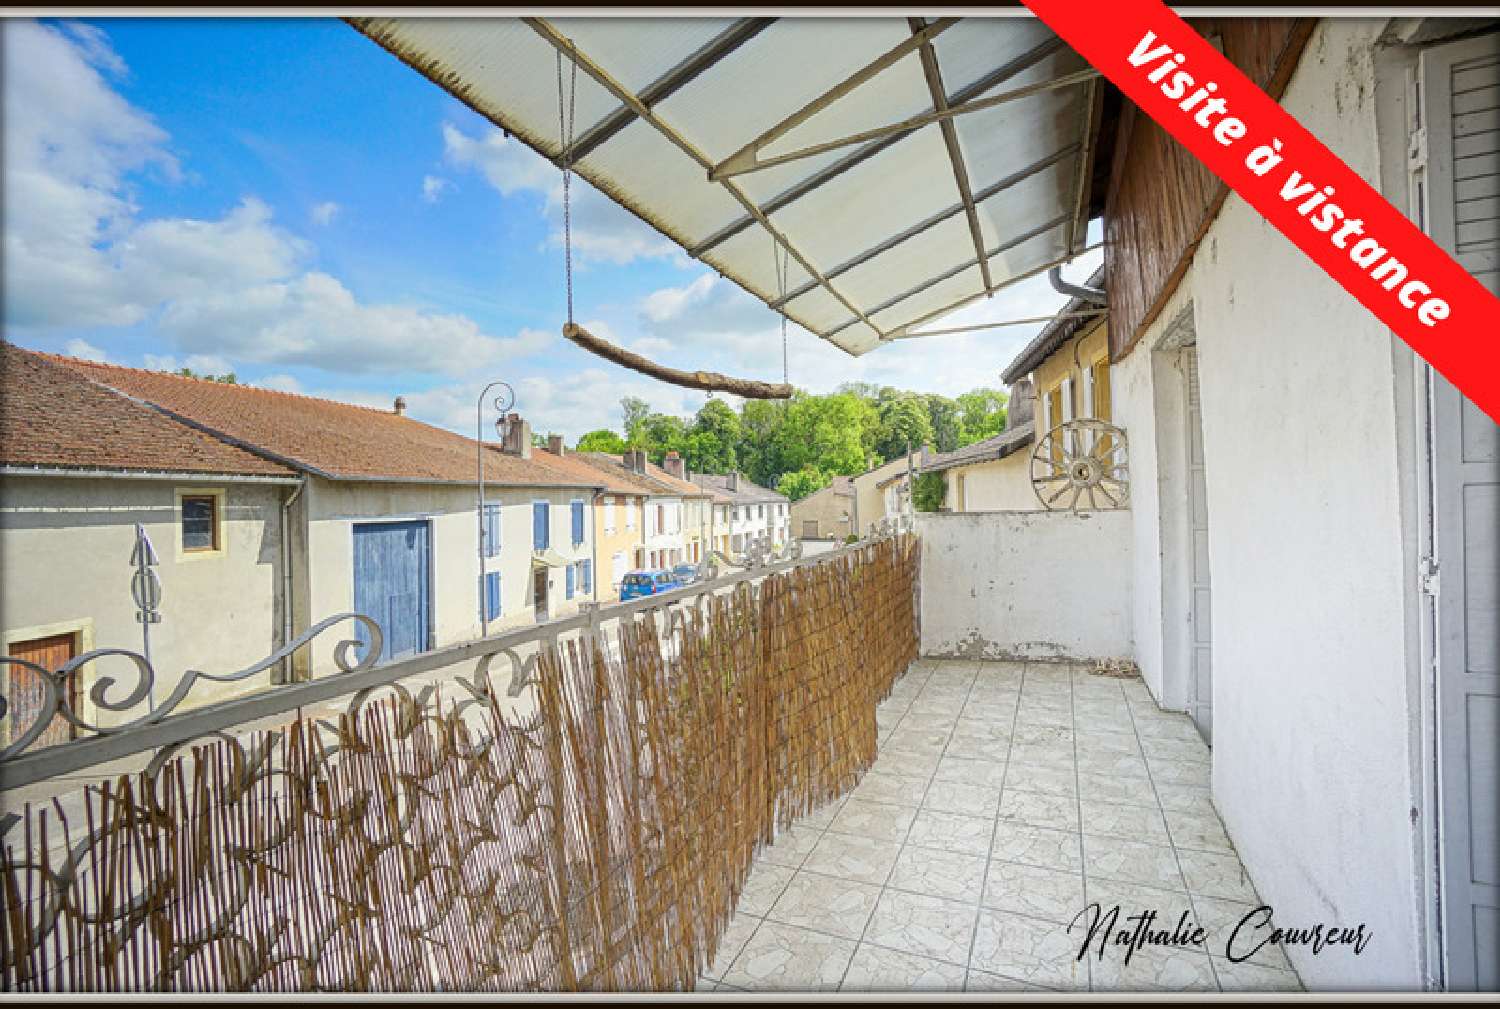  for sale house Nouilly Moselle 1